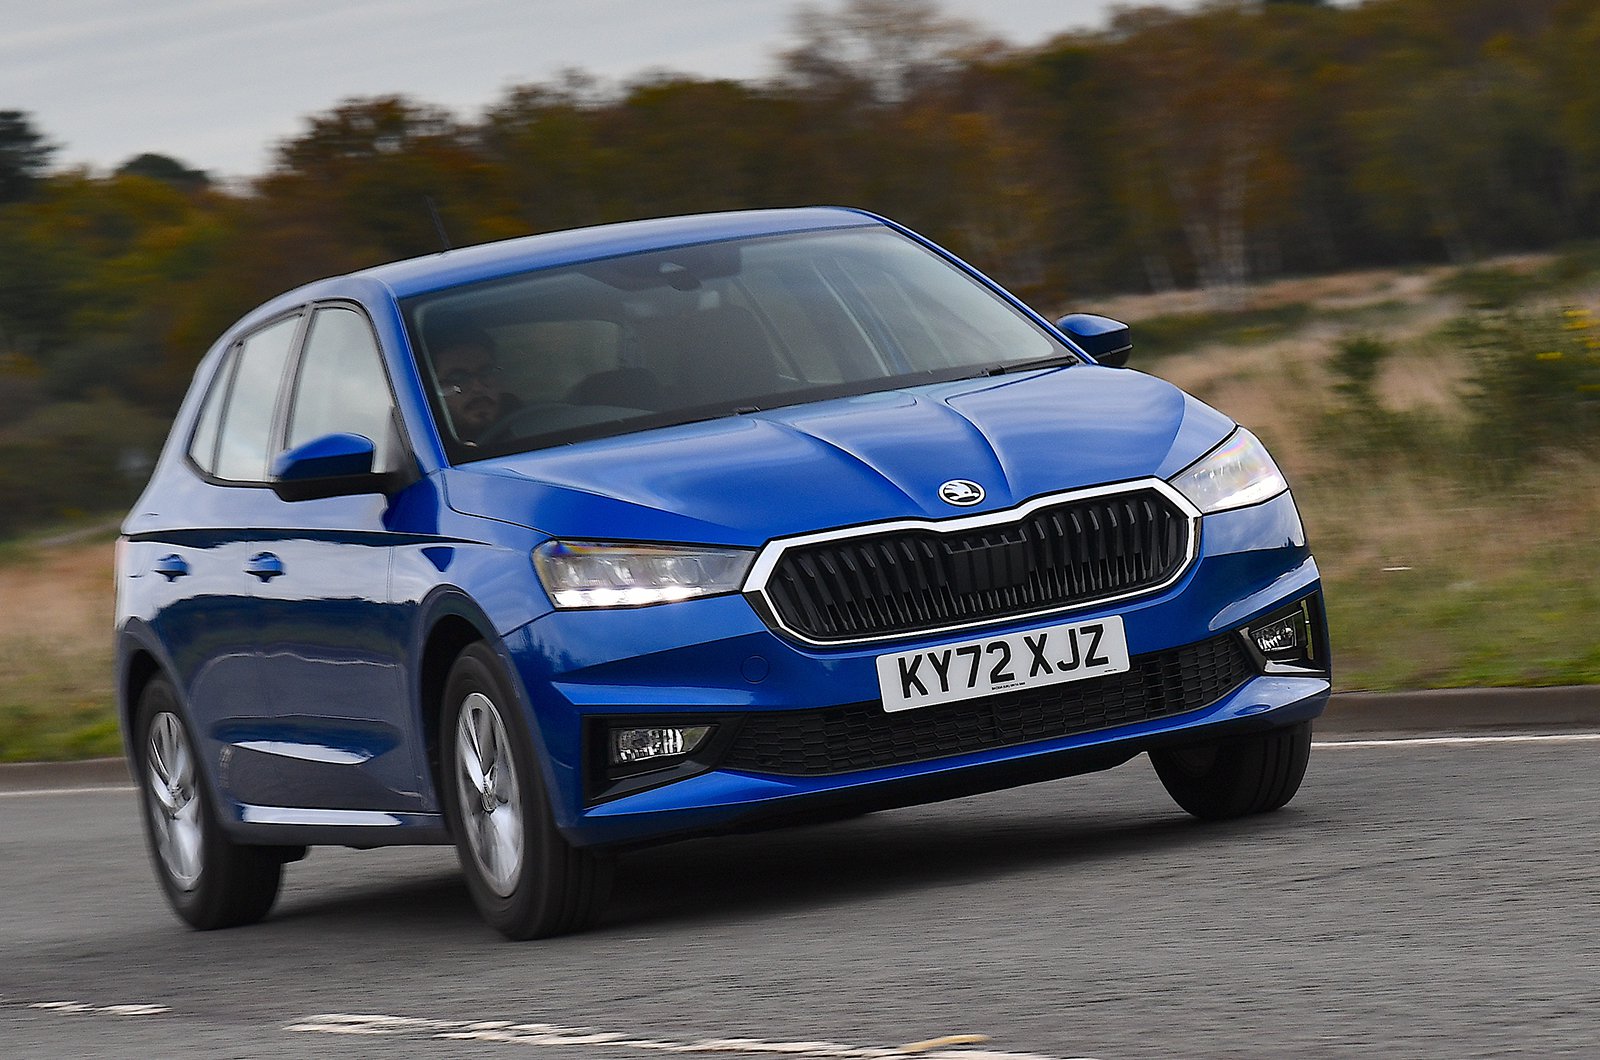 <p><strong>Model</strong> Fabia | <strong>Length</strong> 4108mm | <strong>Our recommended version</strong> 1.0 TSI 95 SE Comfort | <strong>List price</strong> £18,540 | <strong>Target Price</strong> £17,788 | <strong>Target PCP</strong> £226 | <strong>Star Rating</strong> 4</p>  <p>Practical, comfortable and good value, the new Skoda Fabia is one of the best small cars on sale today. Being the smallest car in the Skoda range, it should be cheaper to run than its larger SUV siblings.</p>  <p><strong>Read our full review of the Skoda Fabia or see our new Skoda Fabia deals >></strong></p>